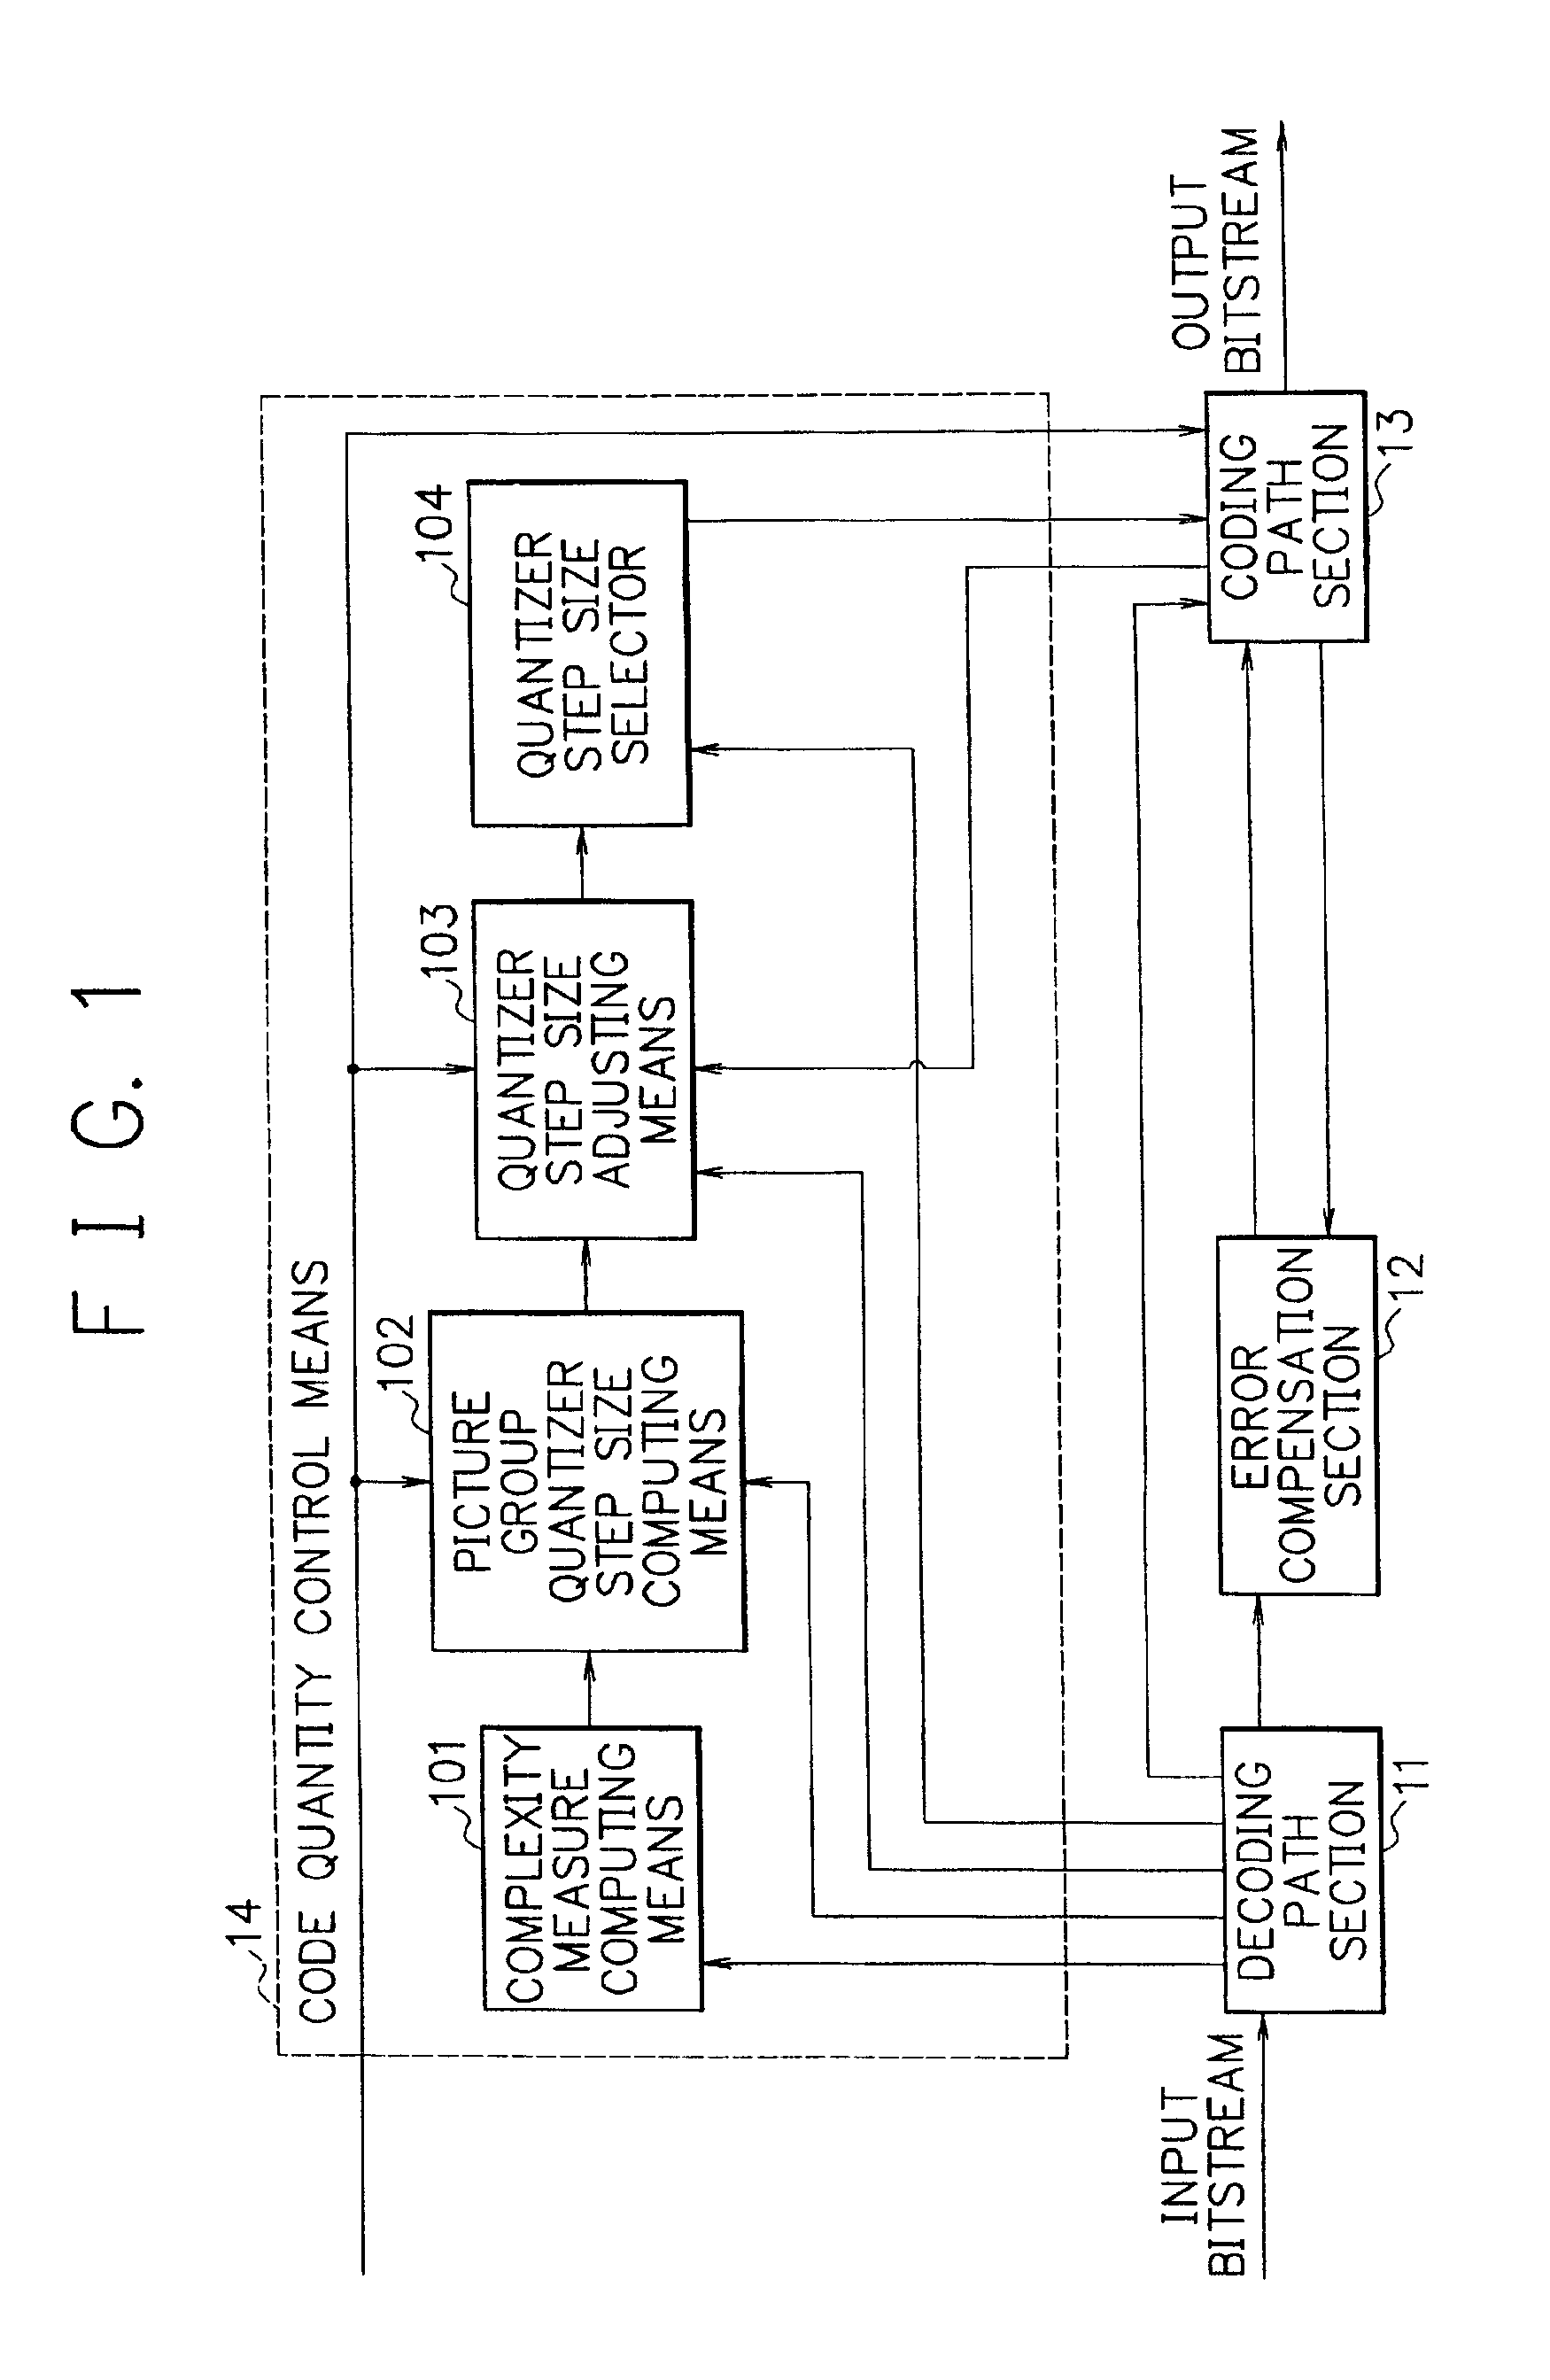 Compressed moving picture re-encoding apparatus and compressed moving picture re-encoding method